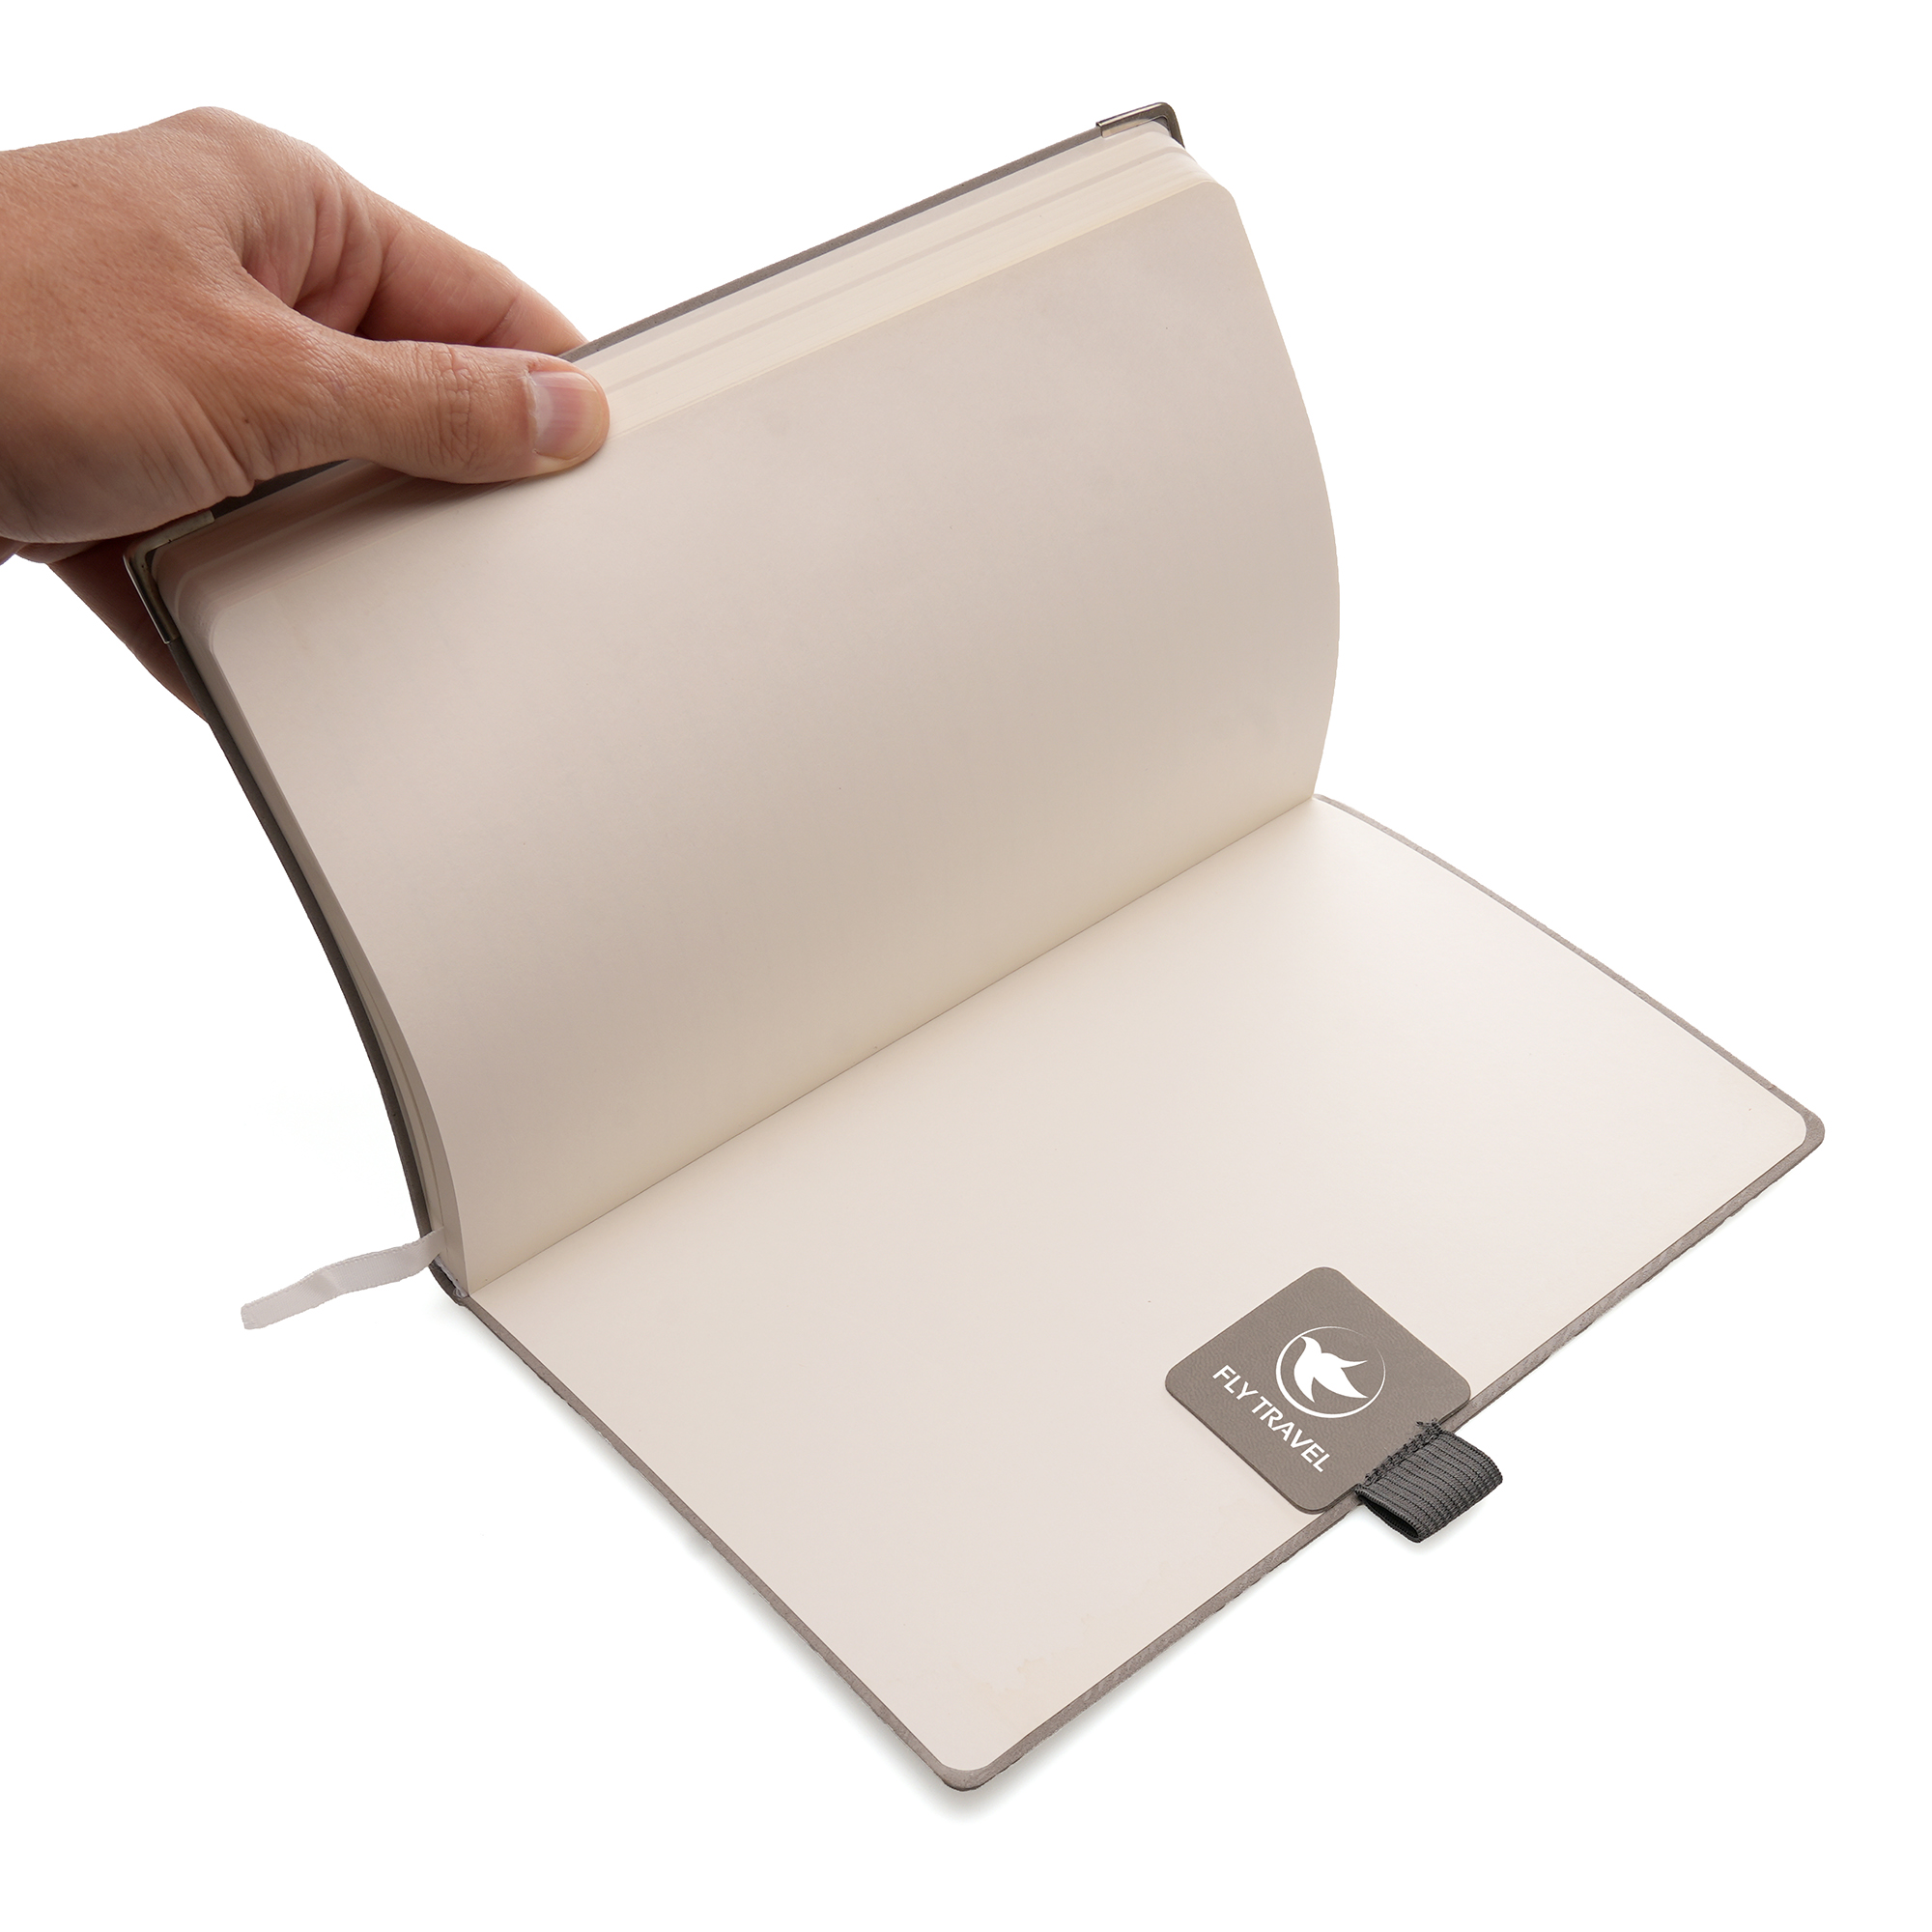 Elastic pen loop mounted to a PU leather patch with a self-adhesive backing to attach to the back of your notebook. Pantone matching available at an additional cost